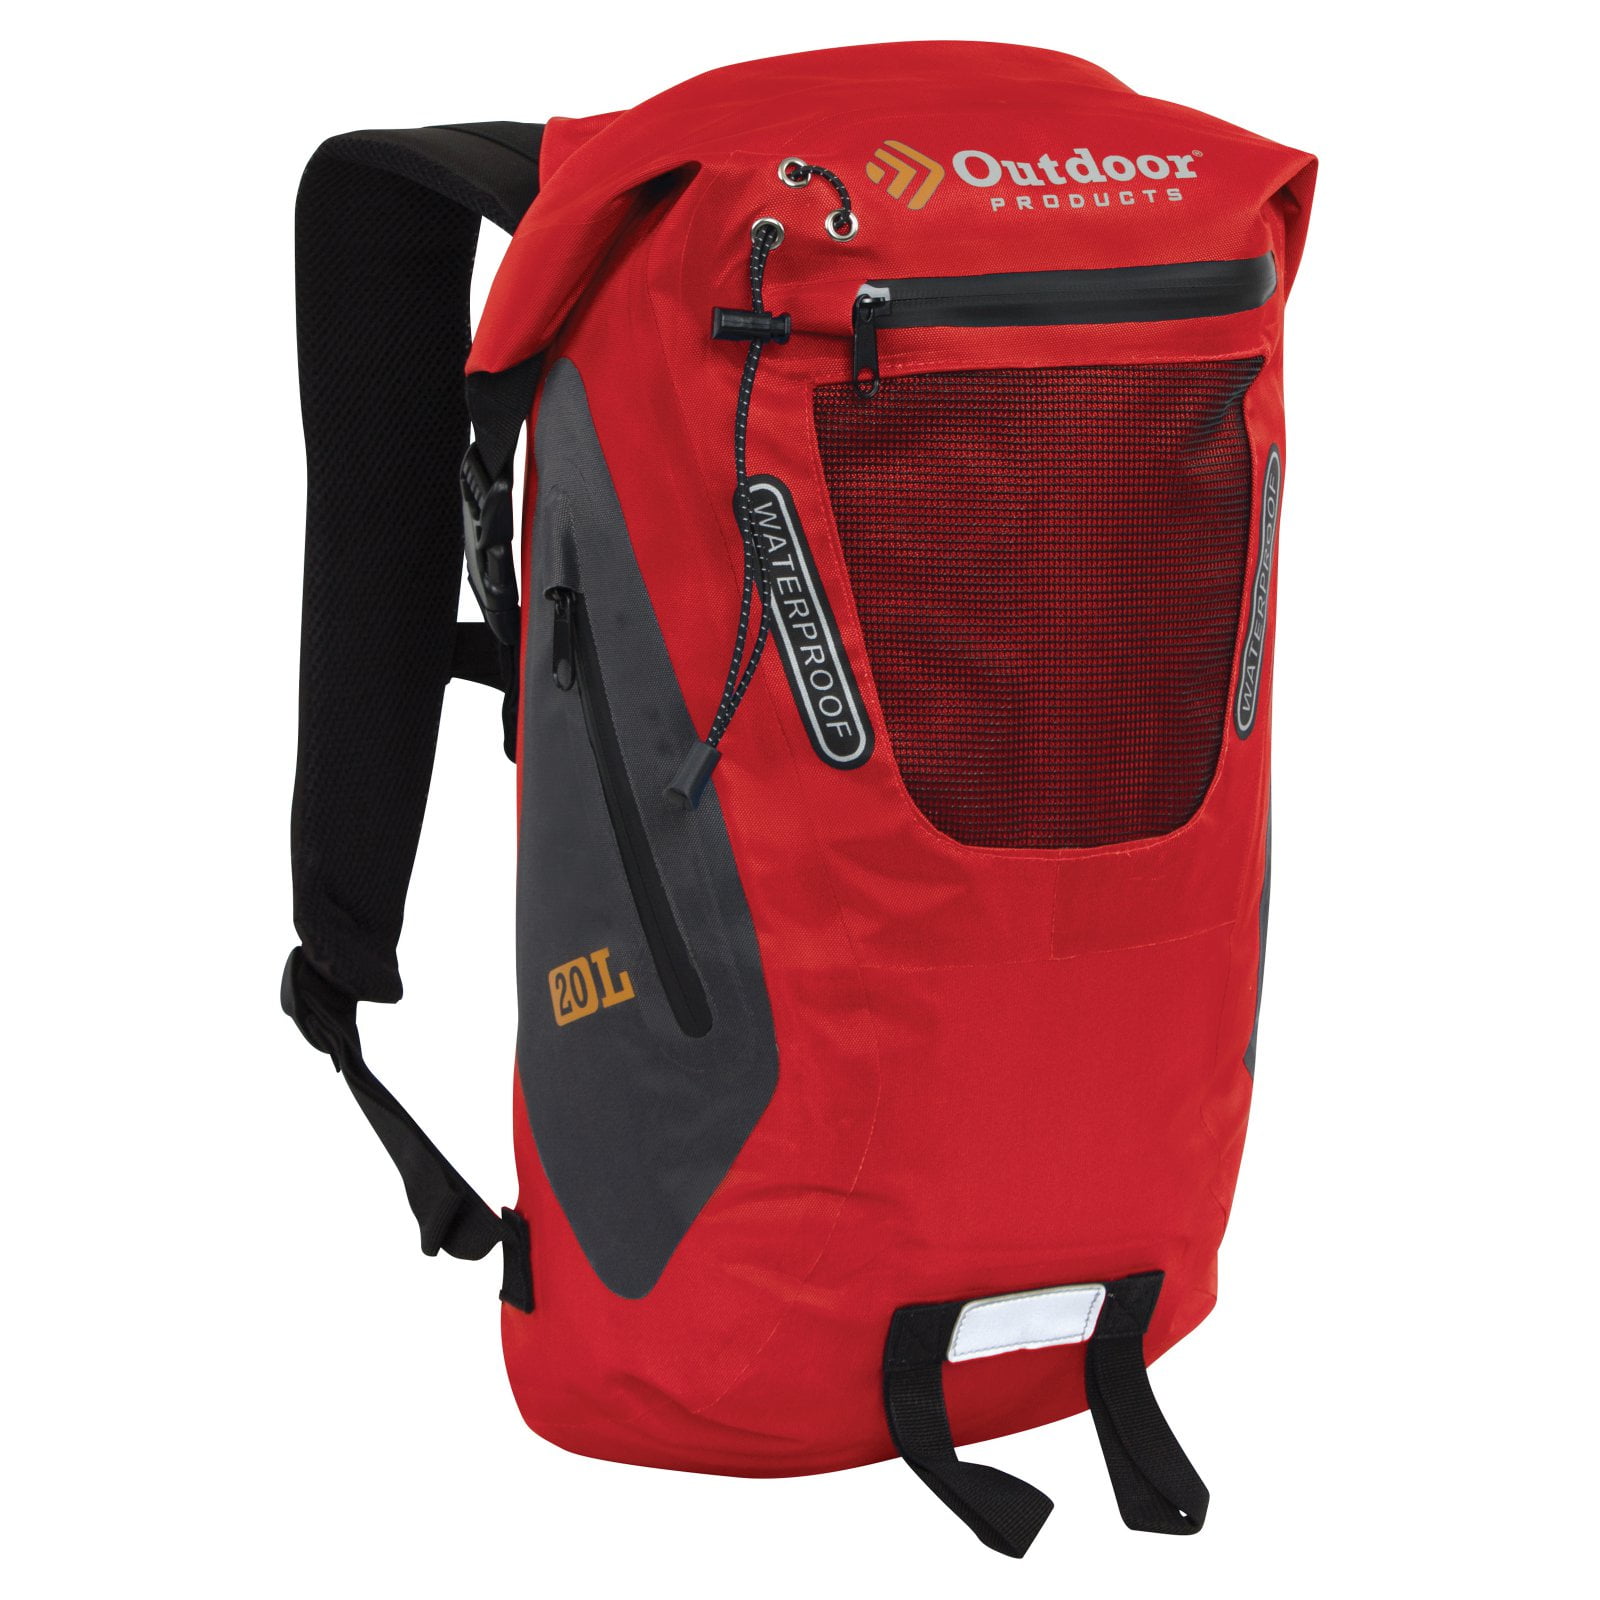 Outdoor Products Backpack, 20 Ltr, Red, Unisex - Walmart.com